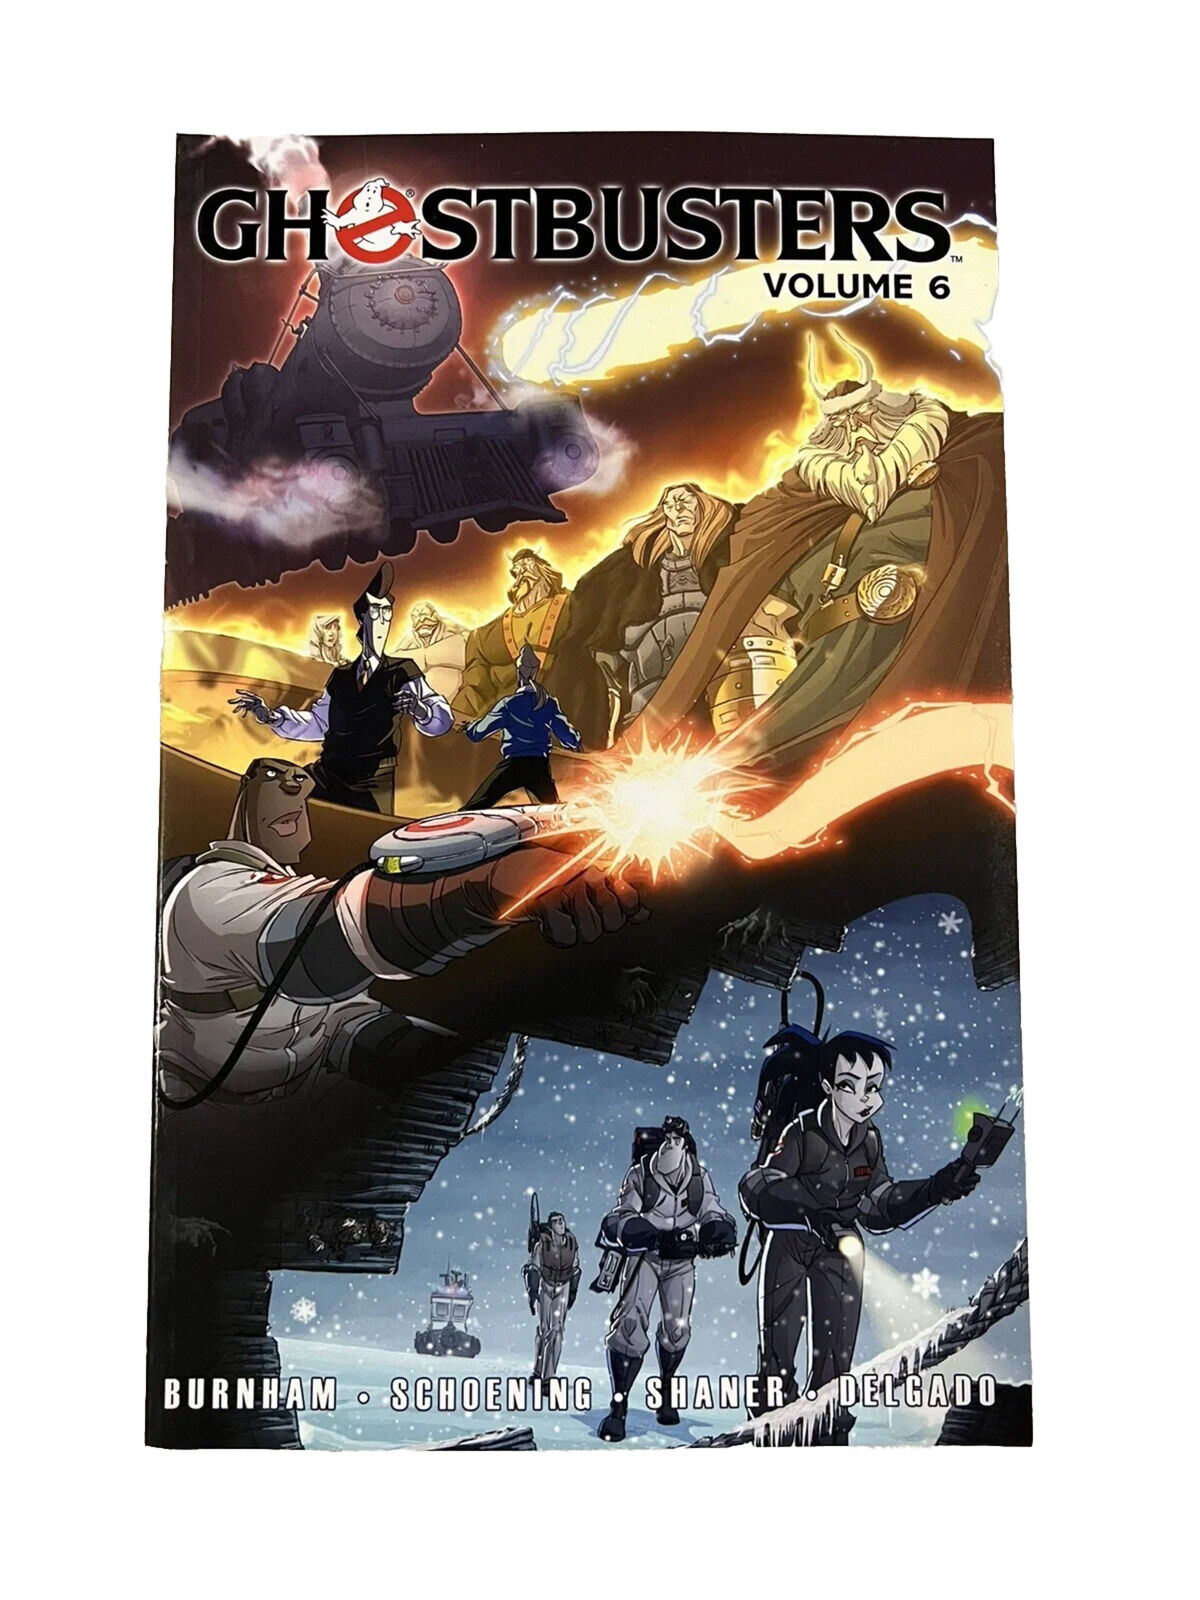 Ghostbusters Vol 6 Trains Brains And Ghostly Remains Tpb